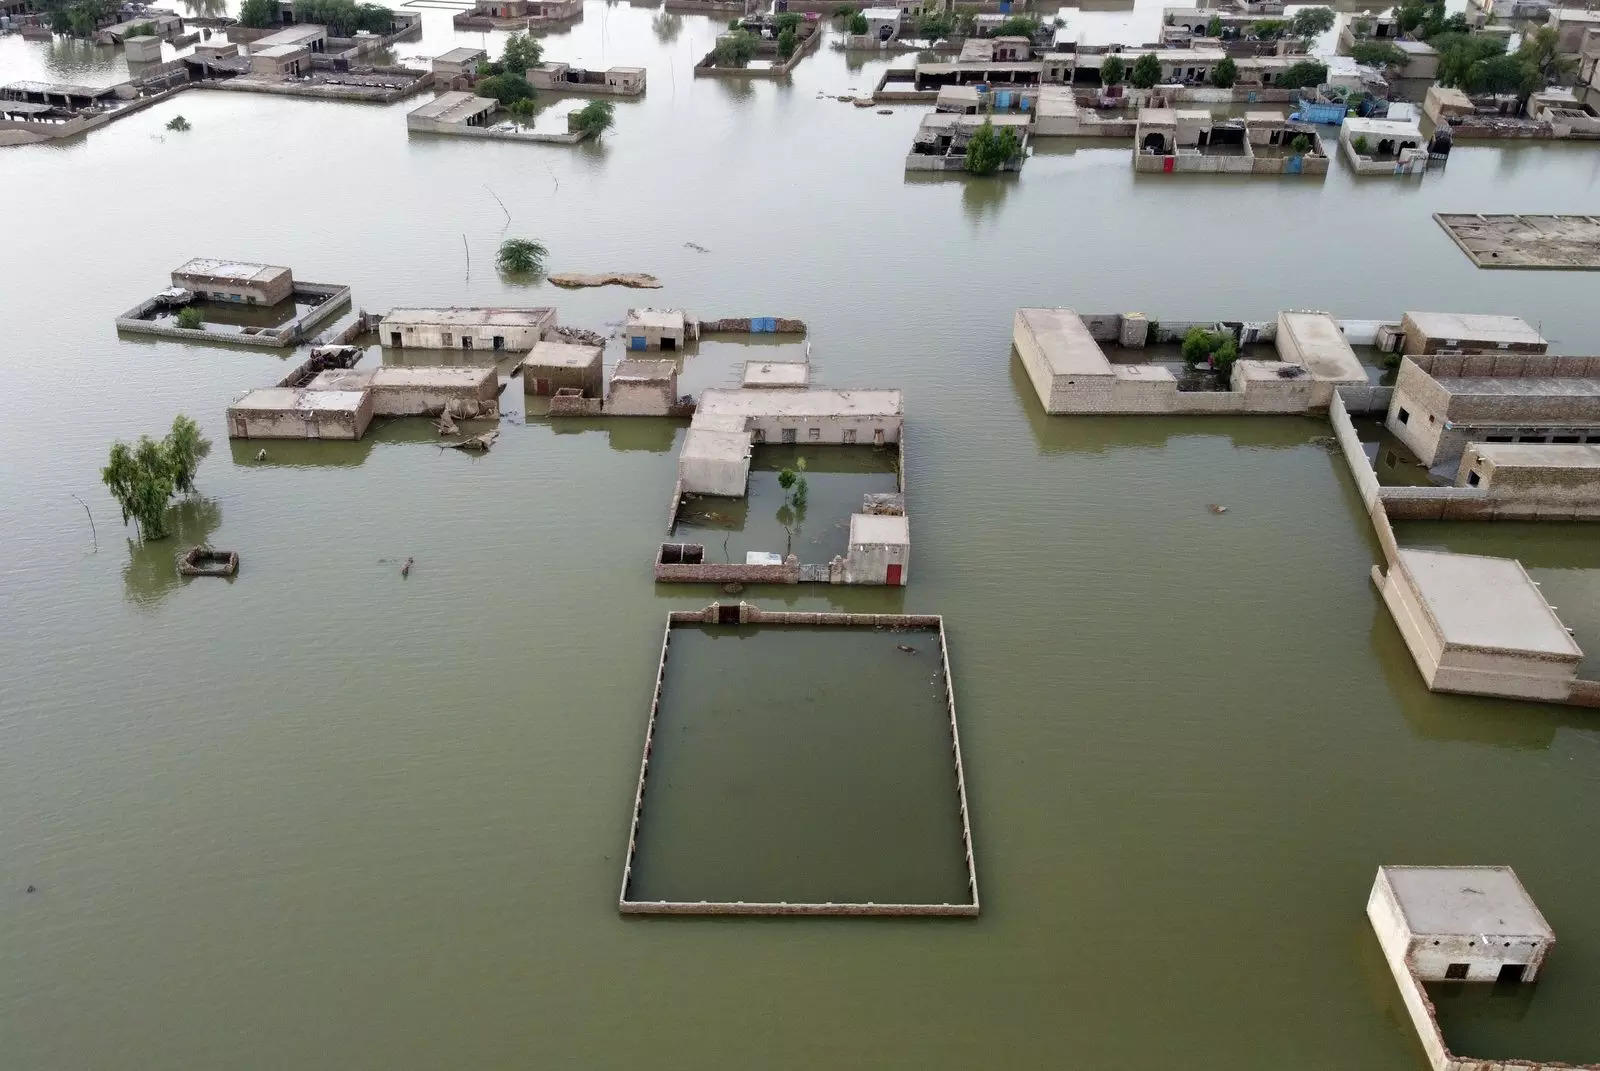 These images show how Pakistan's catastrophic floods spiraled into a nightmare